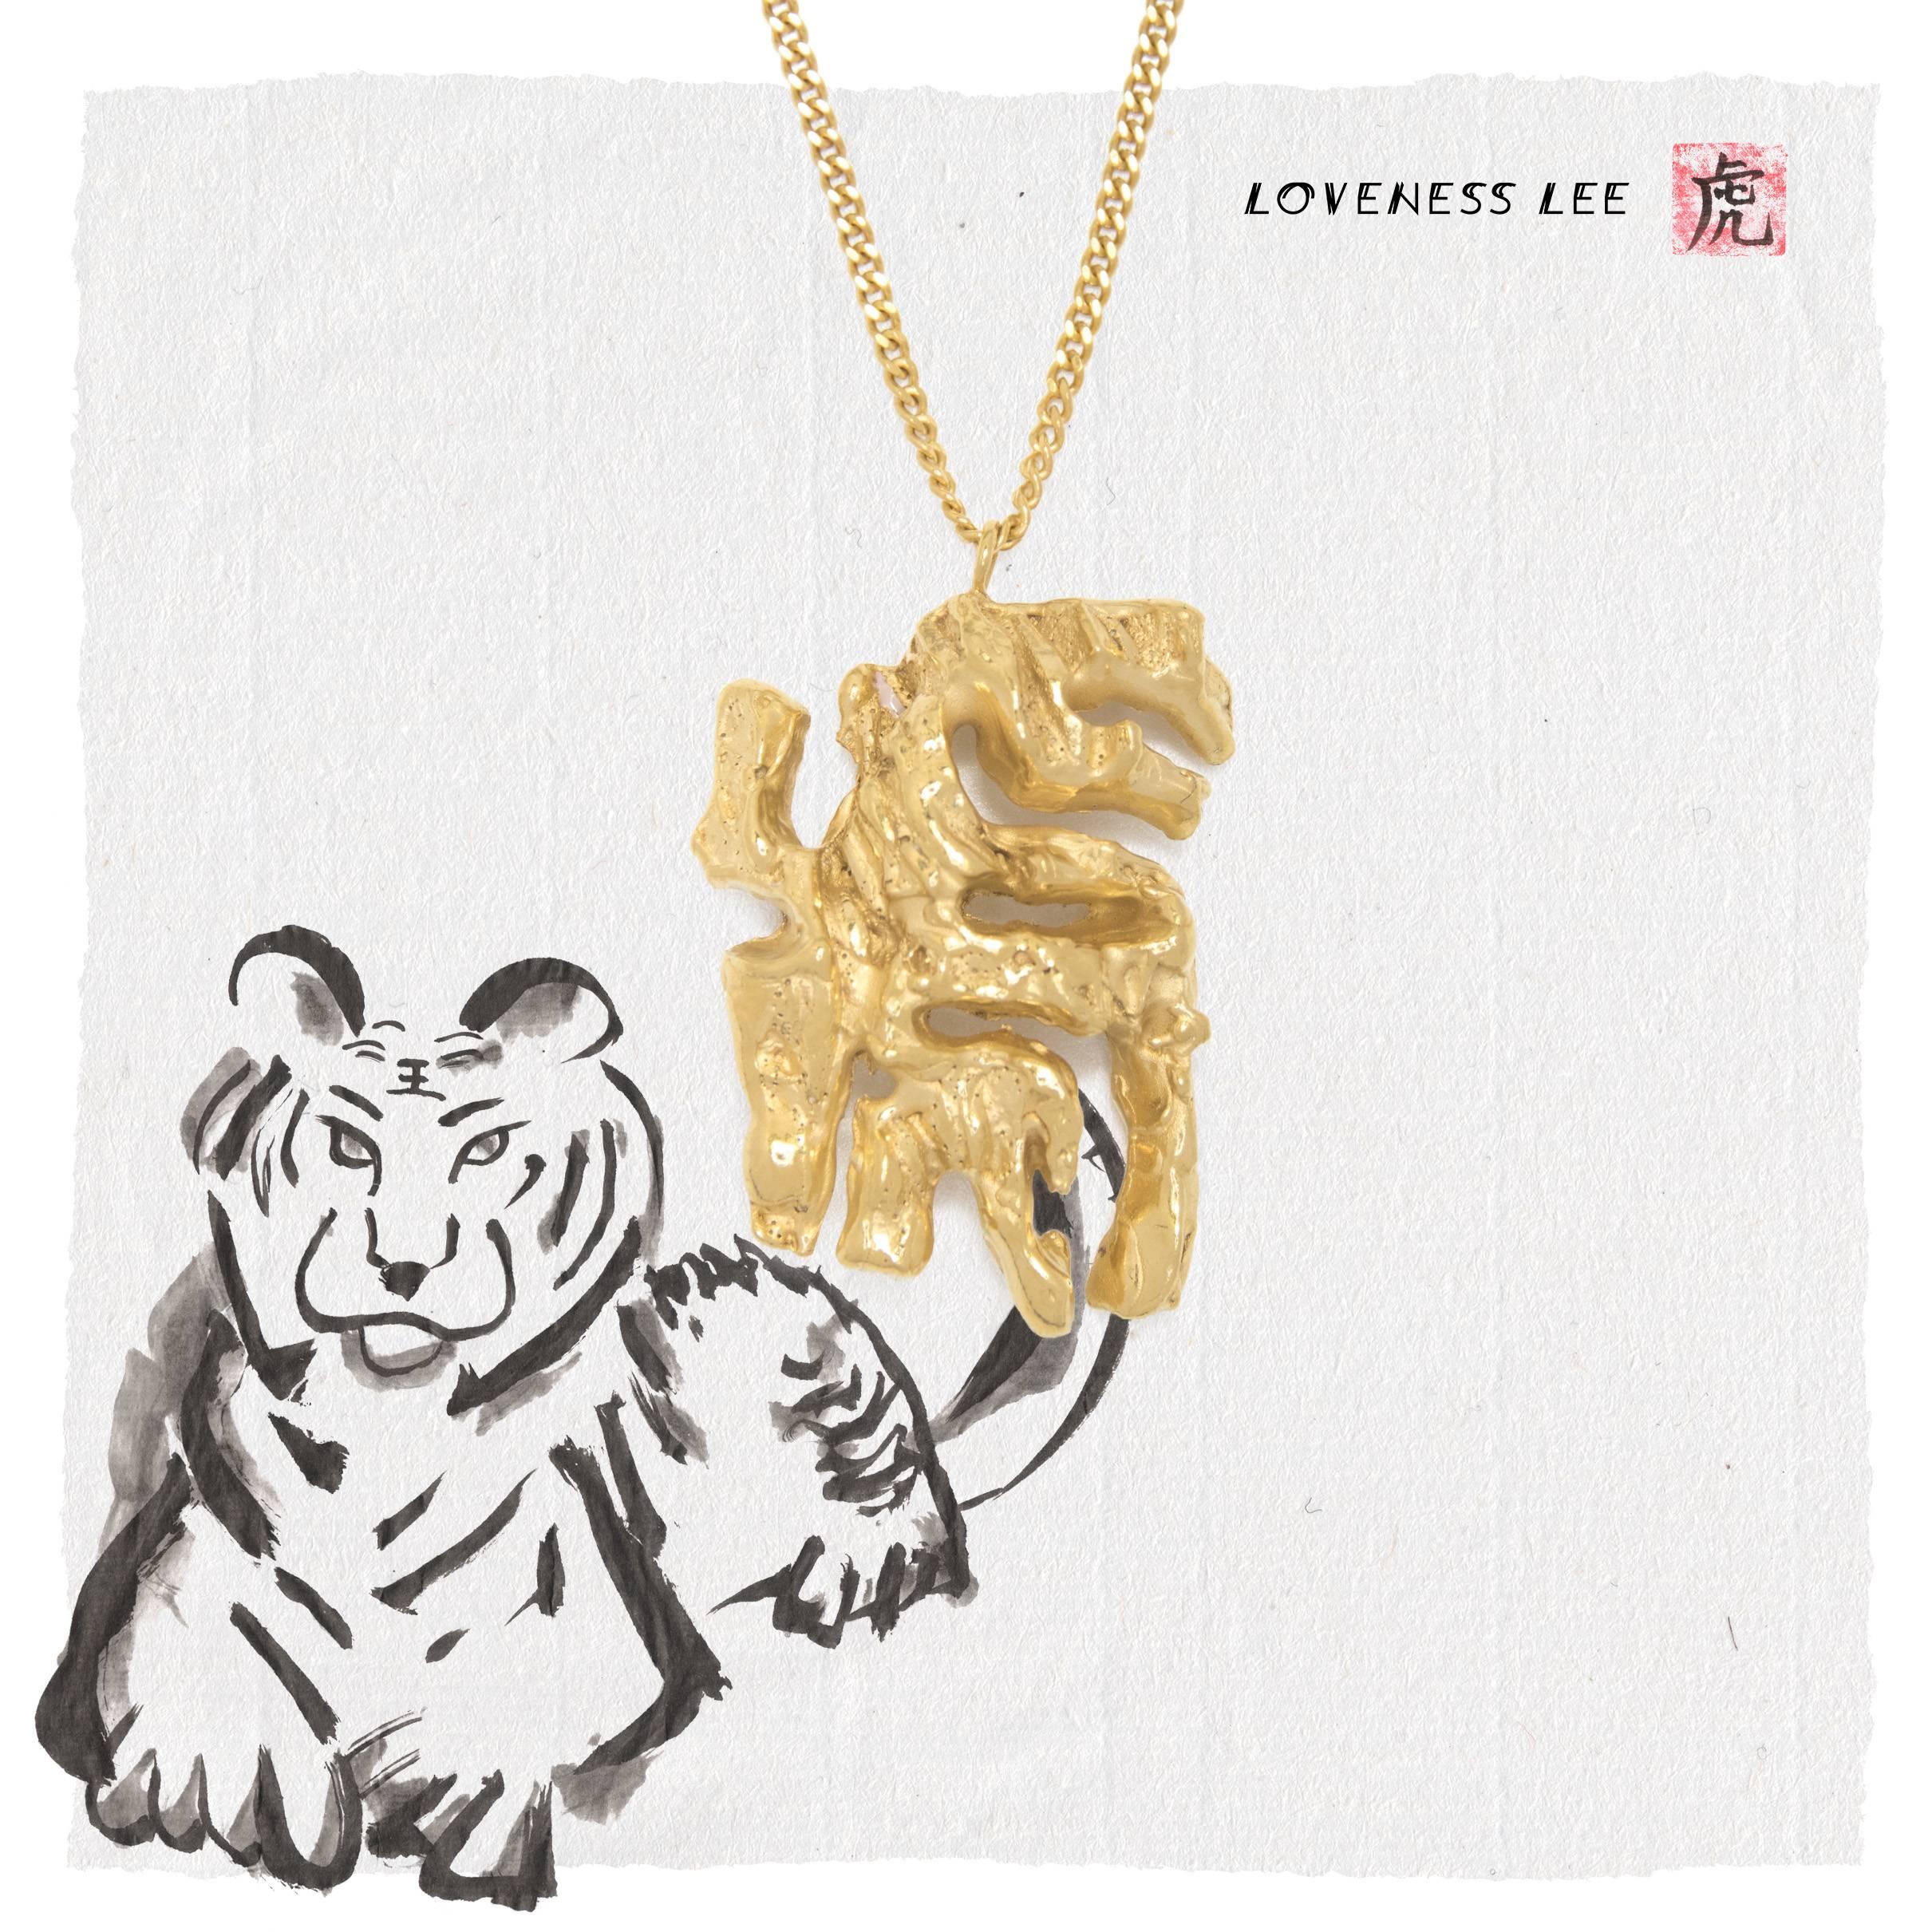 Loveness Lee - Chinese Zodiac Tiger - Horoscope Gold Pendant Necklace In New Condition For Sale In London, GB